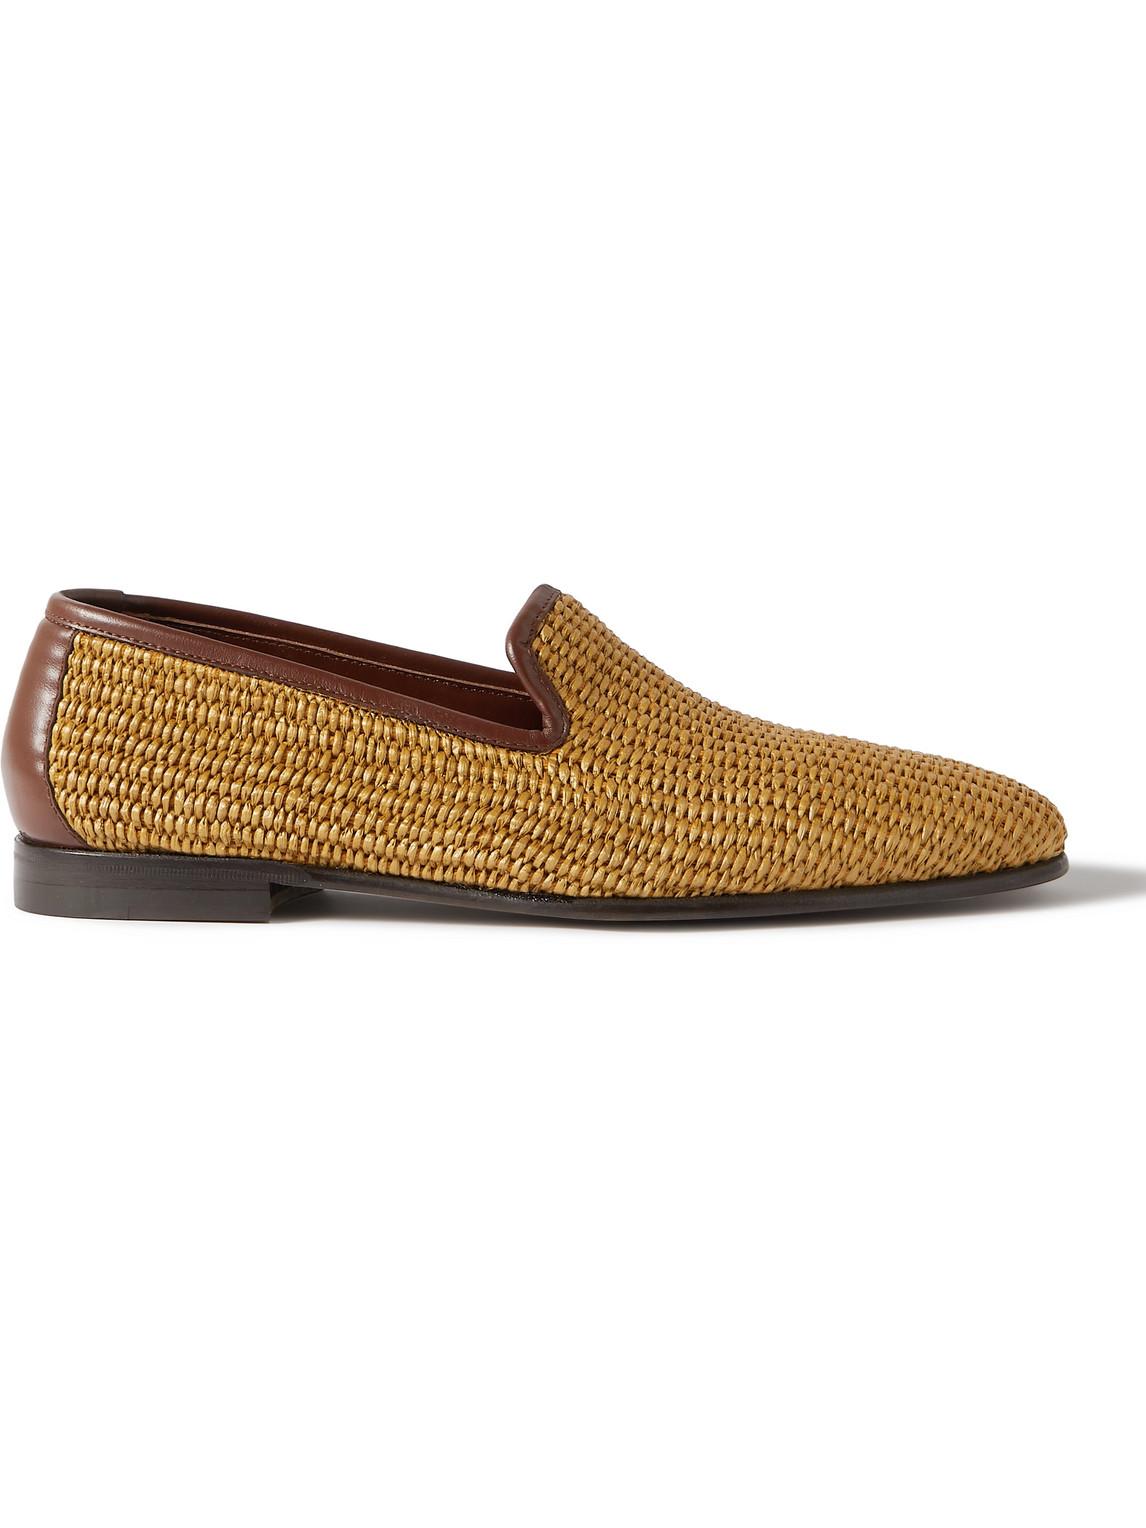 Manolo Blahnik Mario Leather-trimmed Raffia Loafers in Brown for Men | Lyst